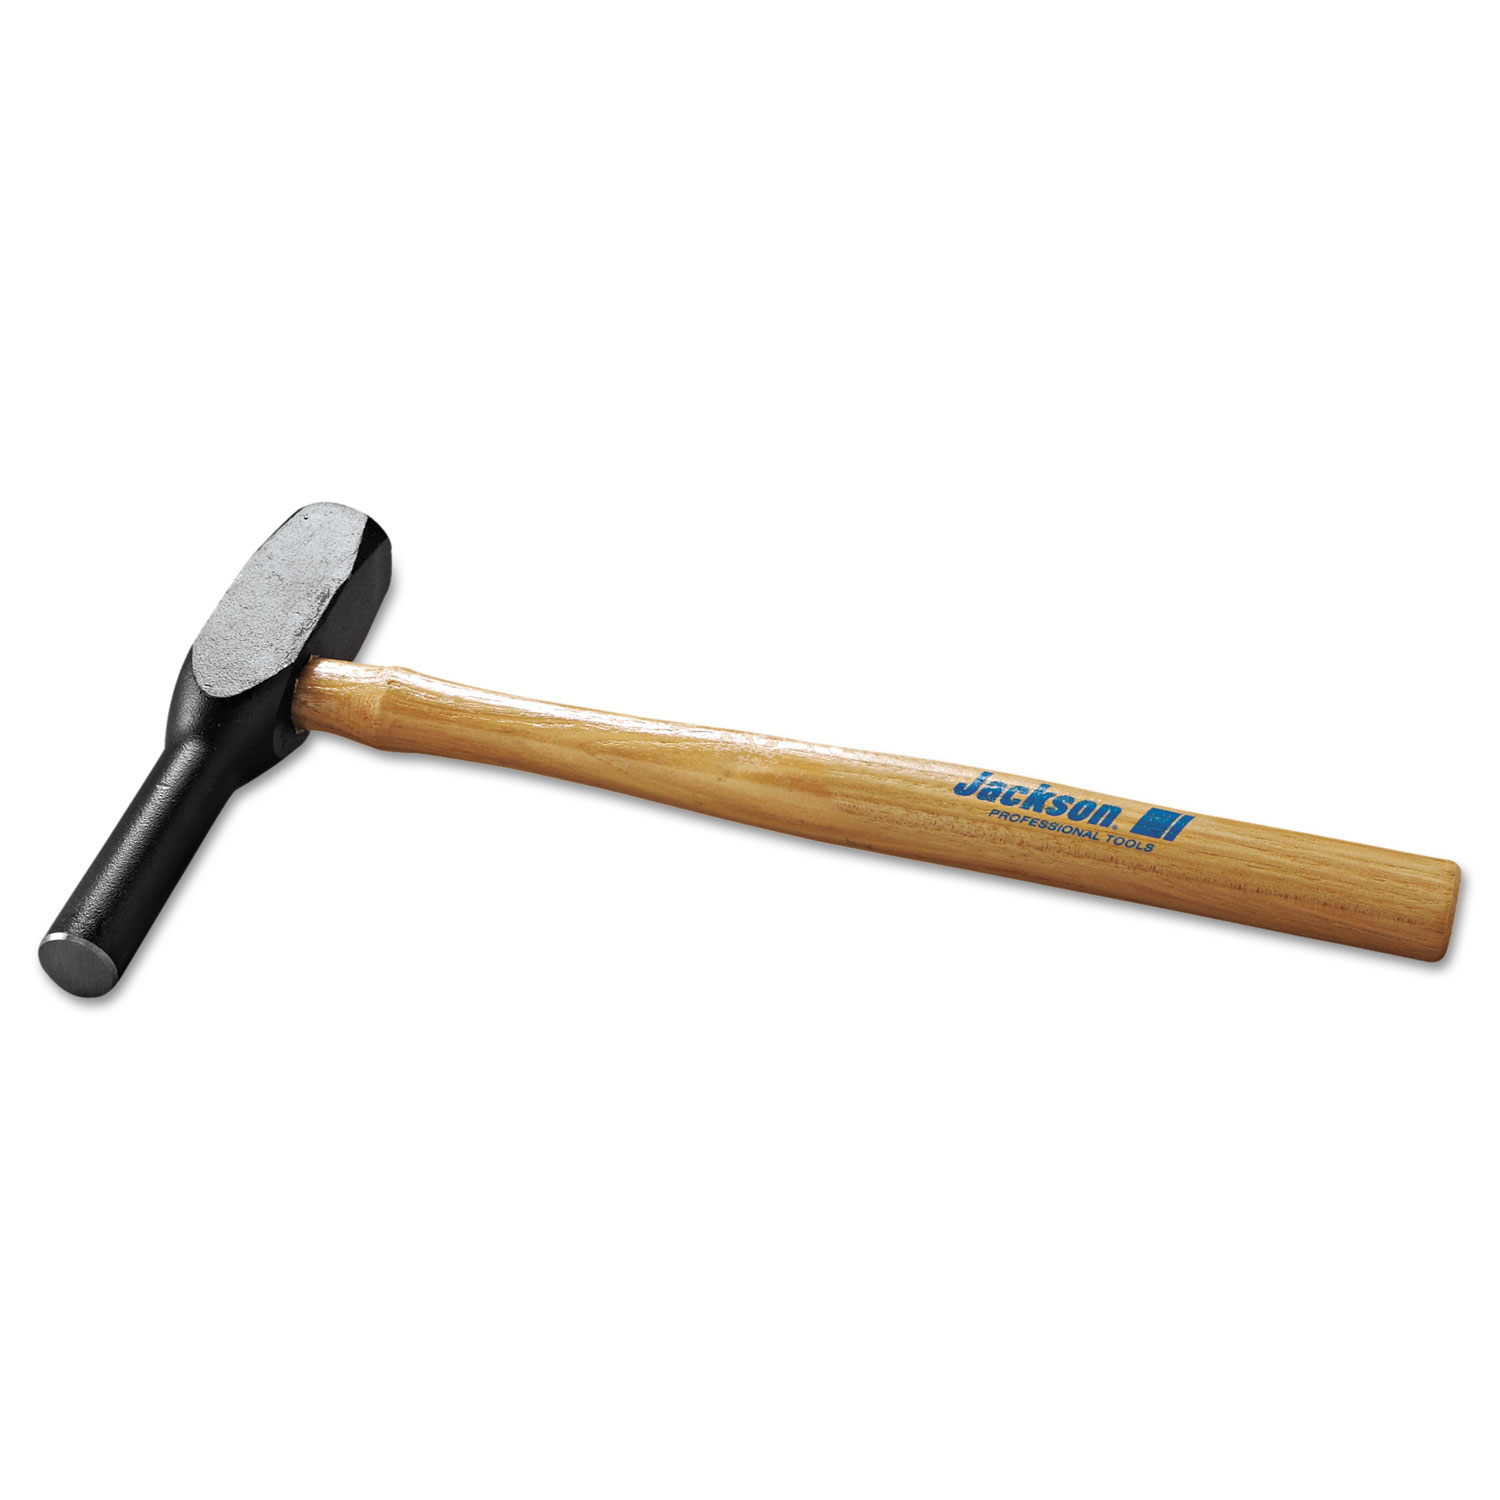 69201 Backing-Out Punch Hammer, 2.25lb, 1 dia, 16 Hickory Handle